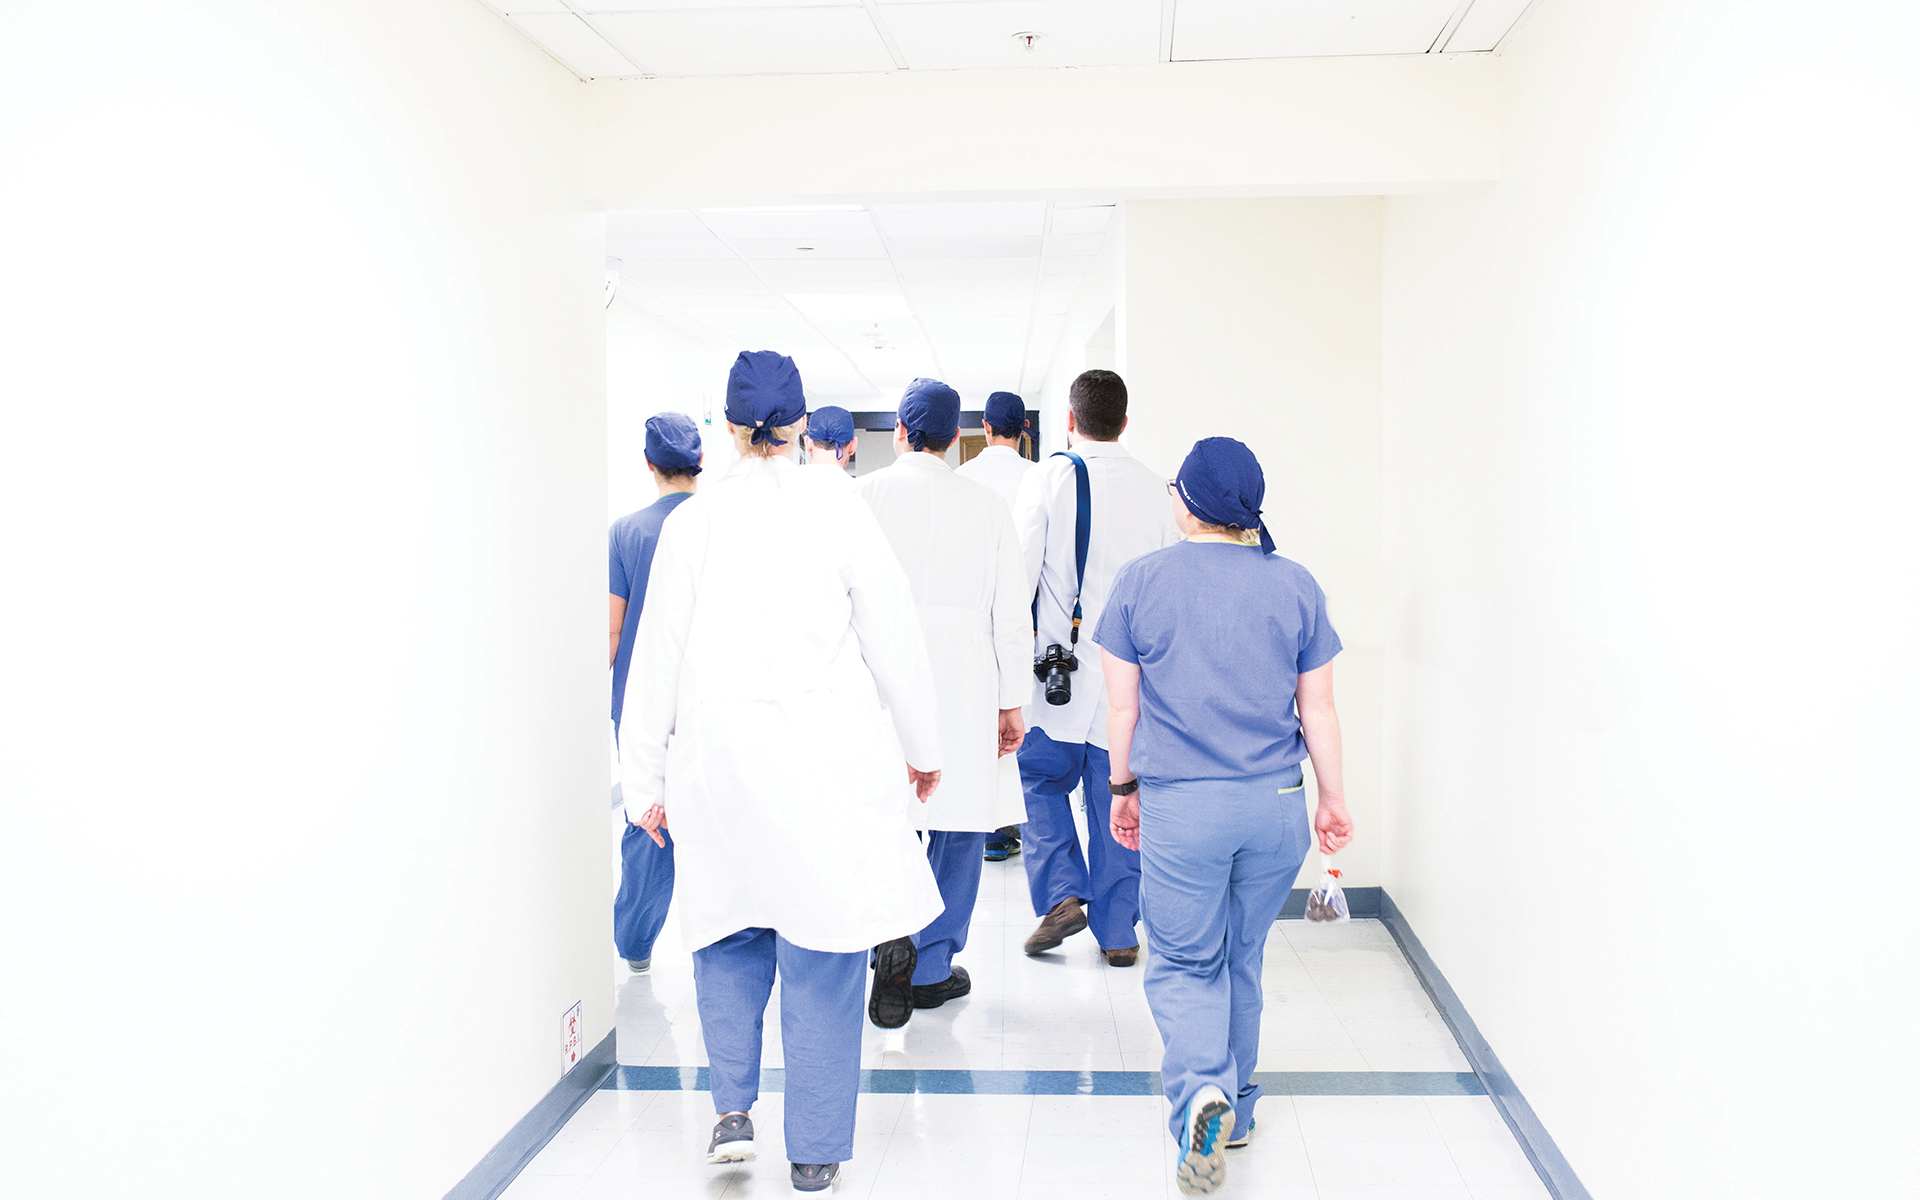 How Integrity Can Heal Burnout - A group of doctors, nurses, and other healthcare workers walking down a hallway in scrubs and uniforms